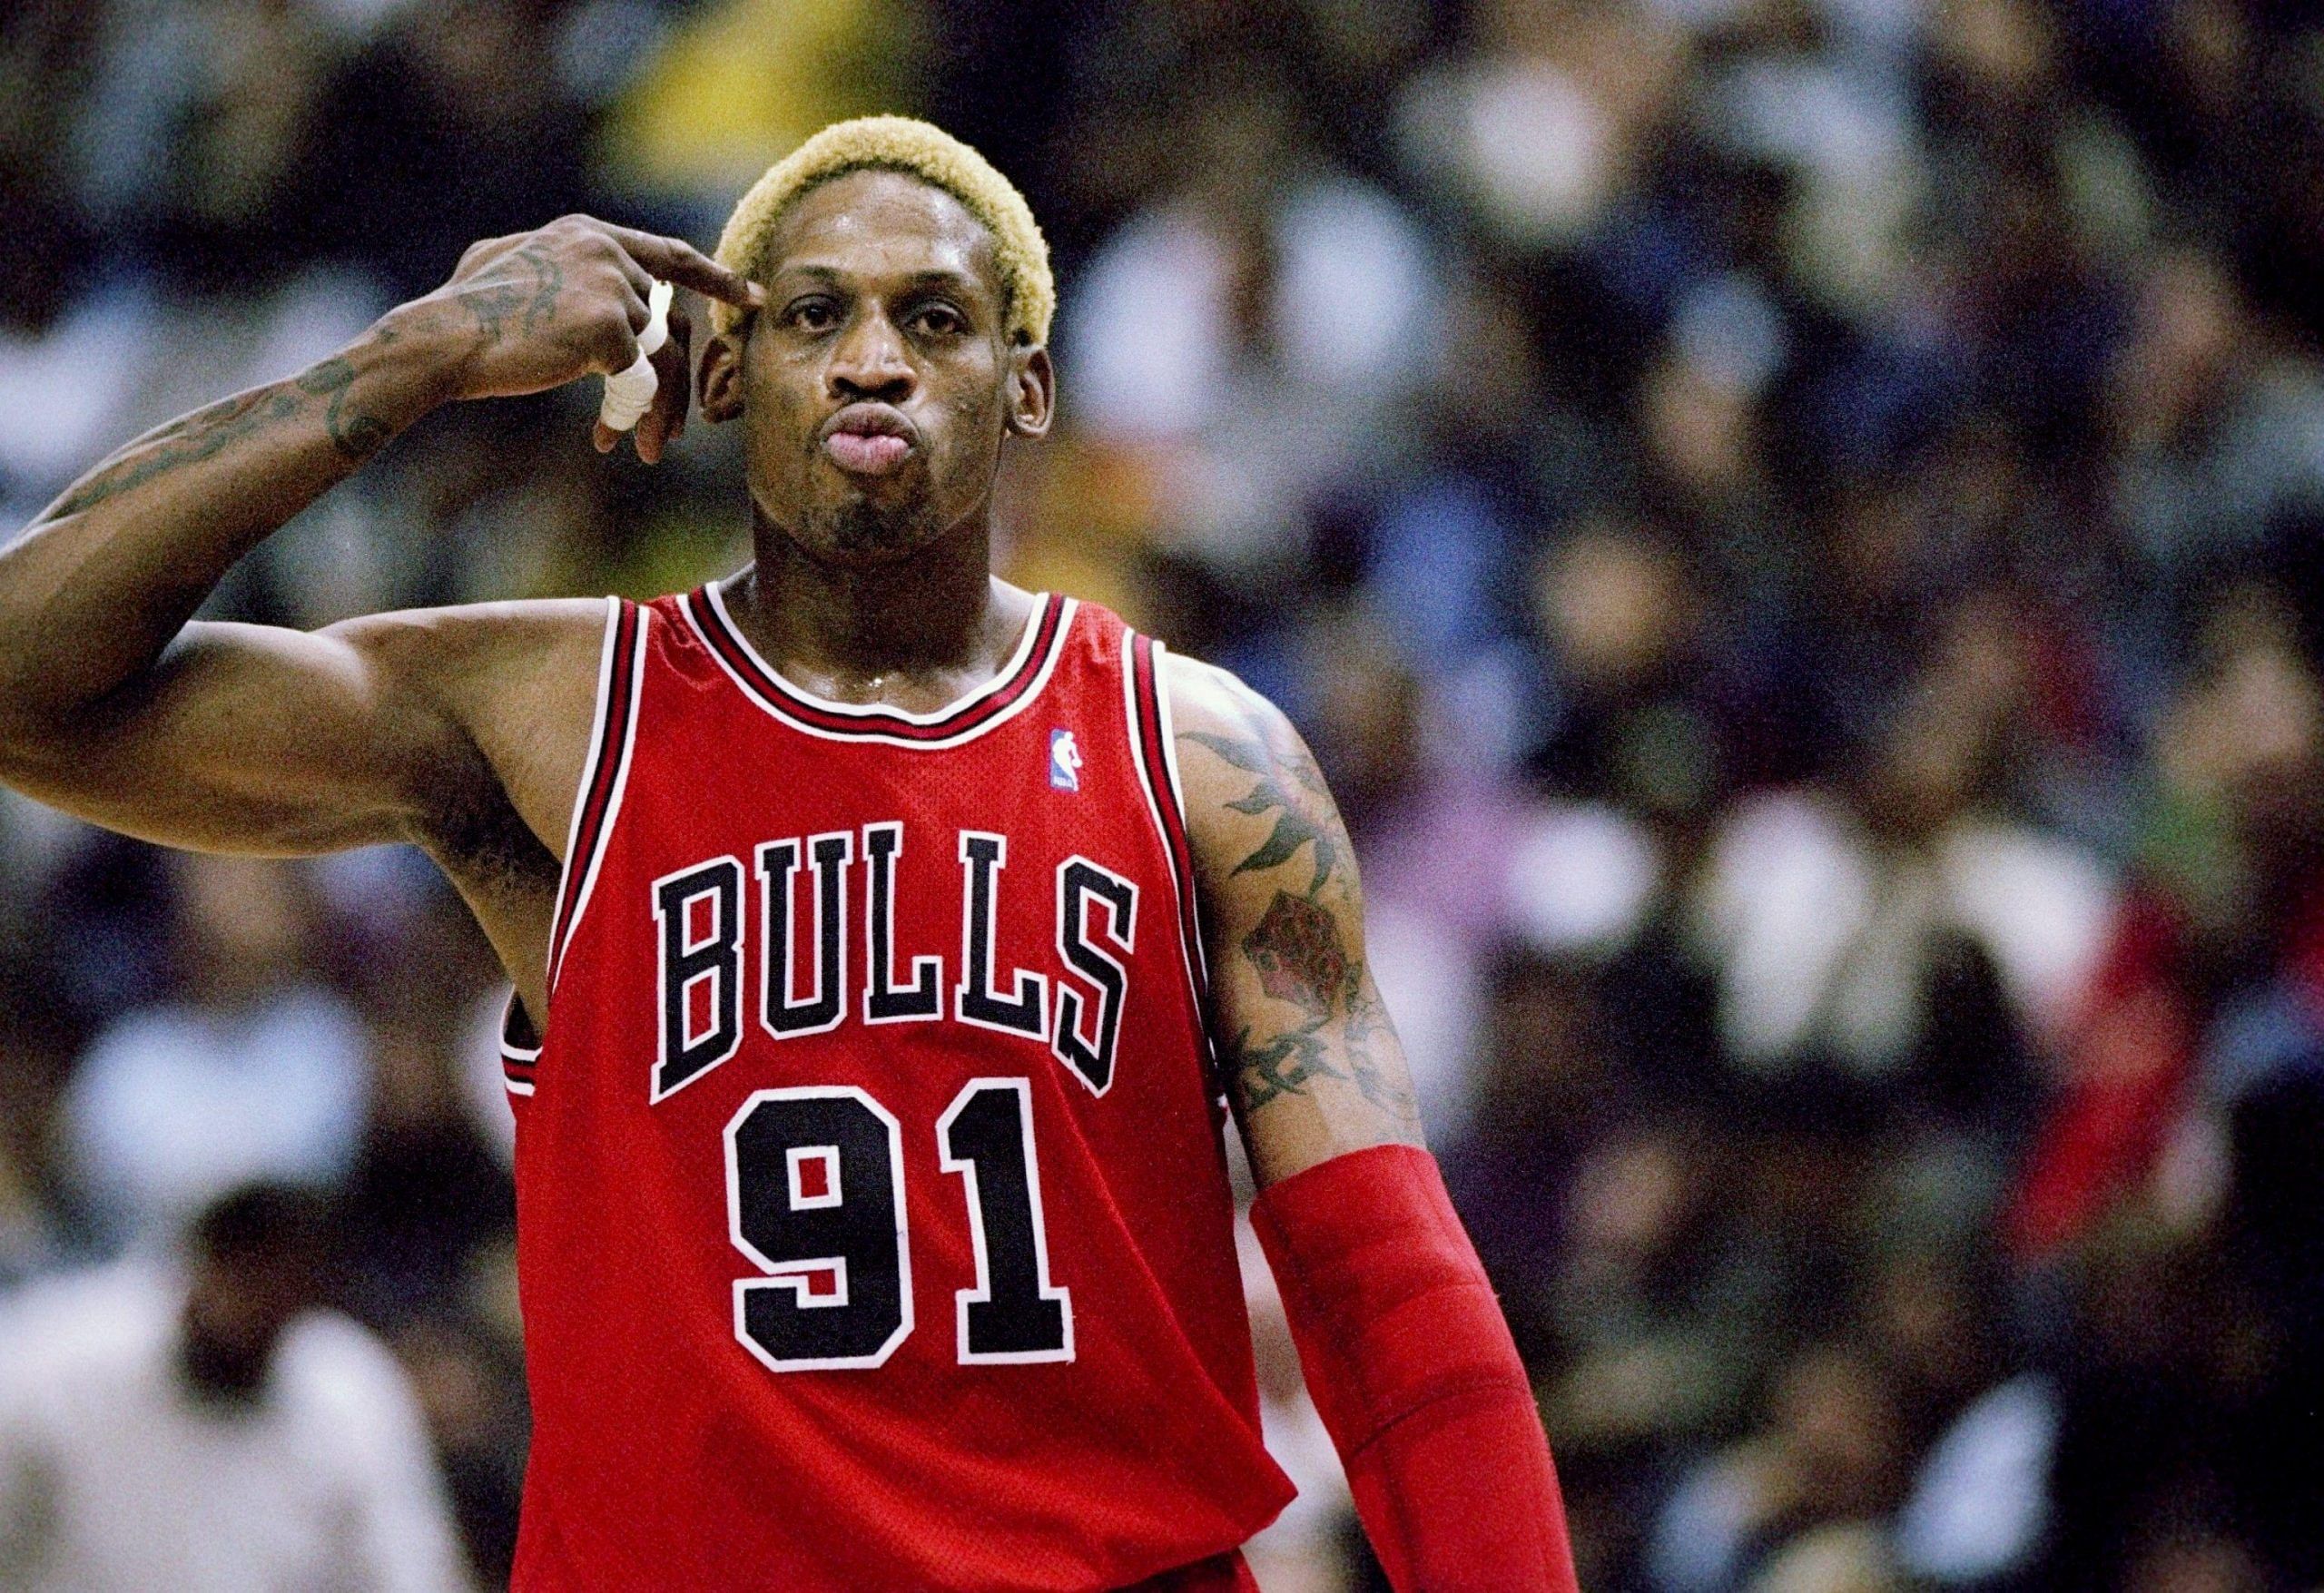 Dennis Rodman turns his hairstyles into a new NFT series